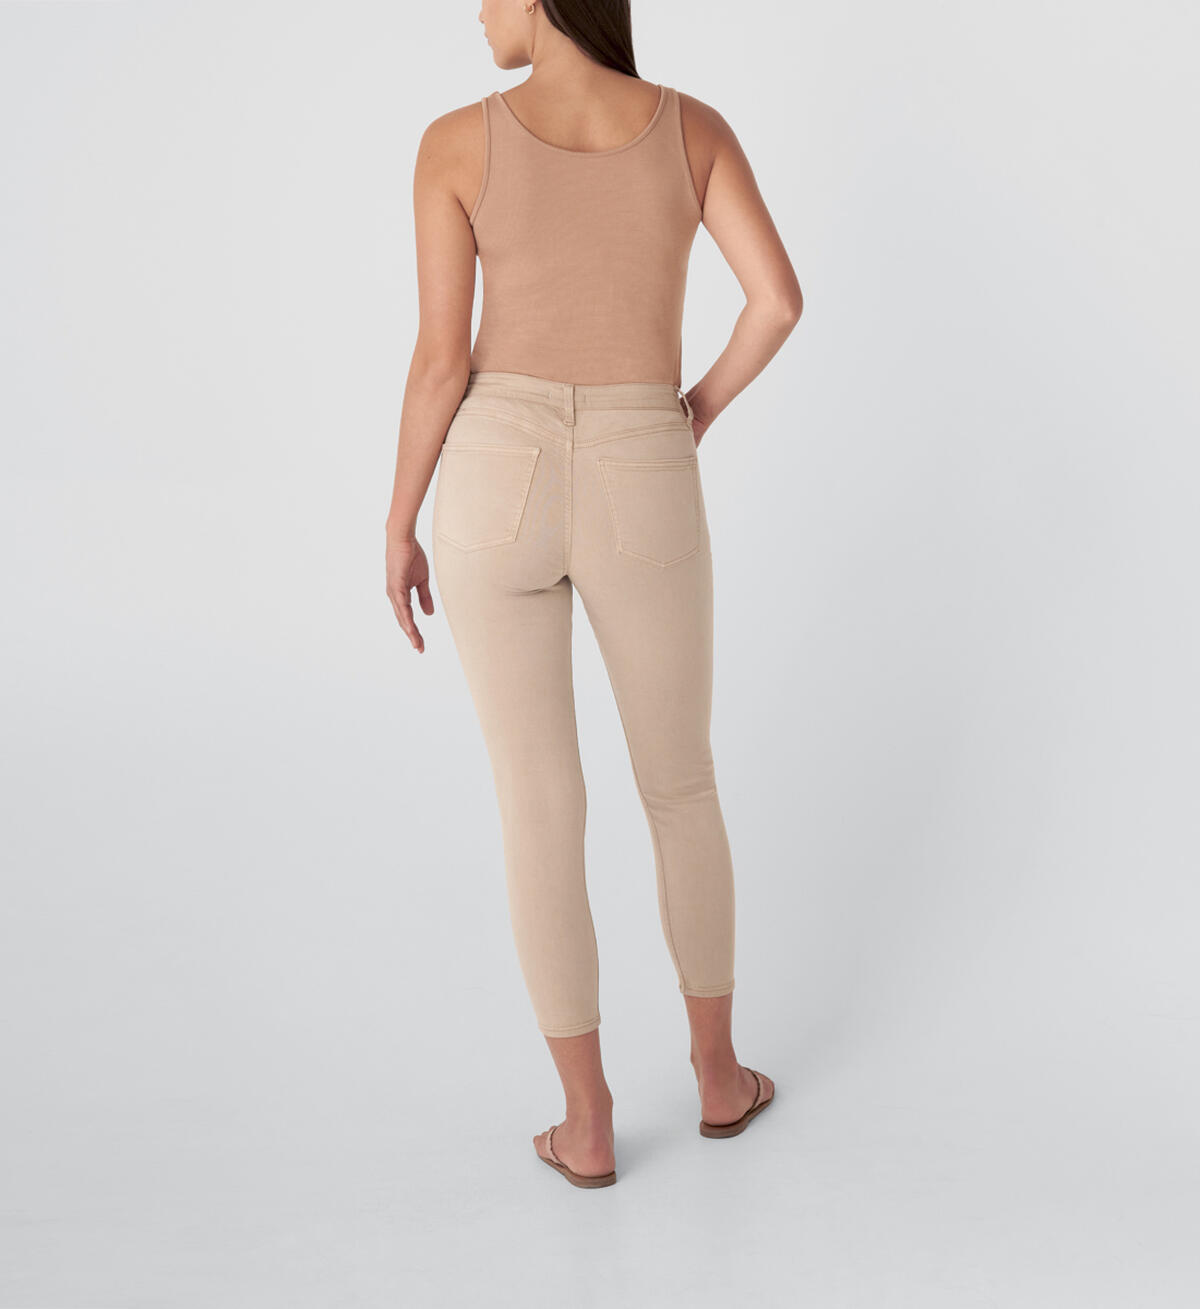 Most Wanted Mid Rise Skinny Jeans, Tan, hi-res image number 1